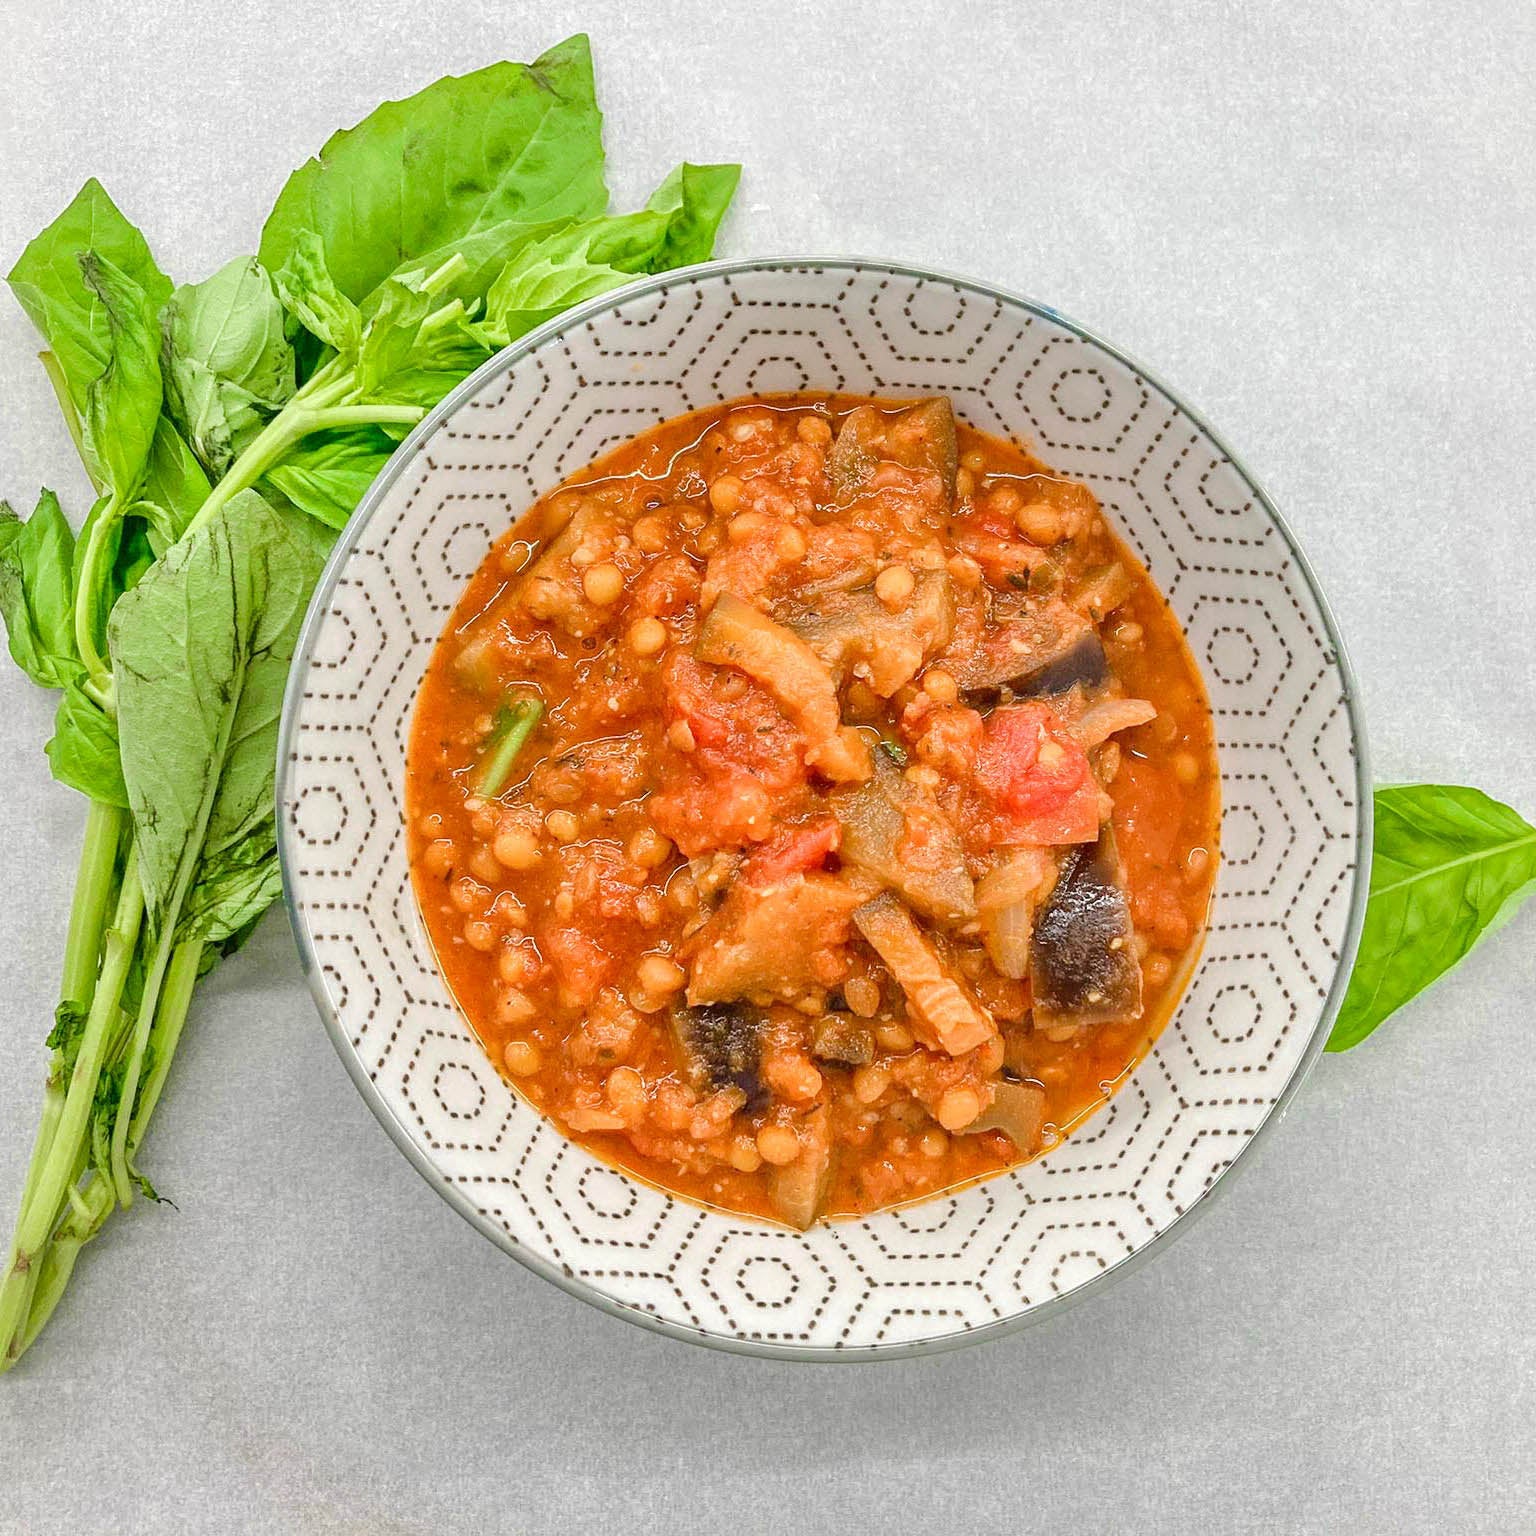 Lentils and eggplant stew